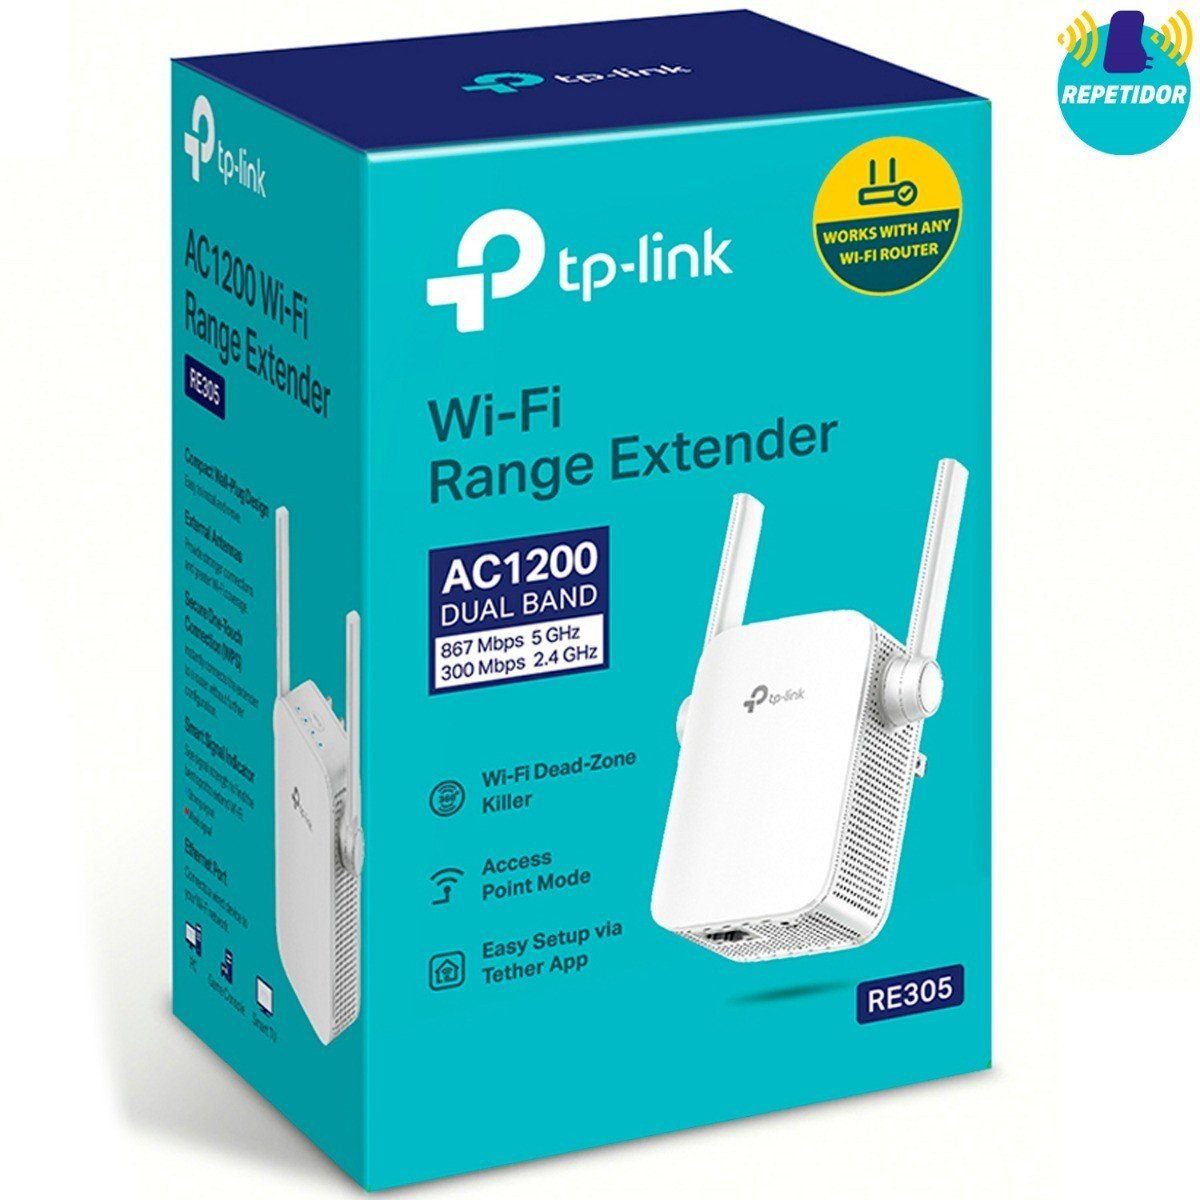 TP-LINK AC1200 RE305 Repetidor Wifi Dual 1200Mbps RE305